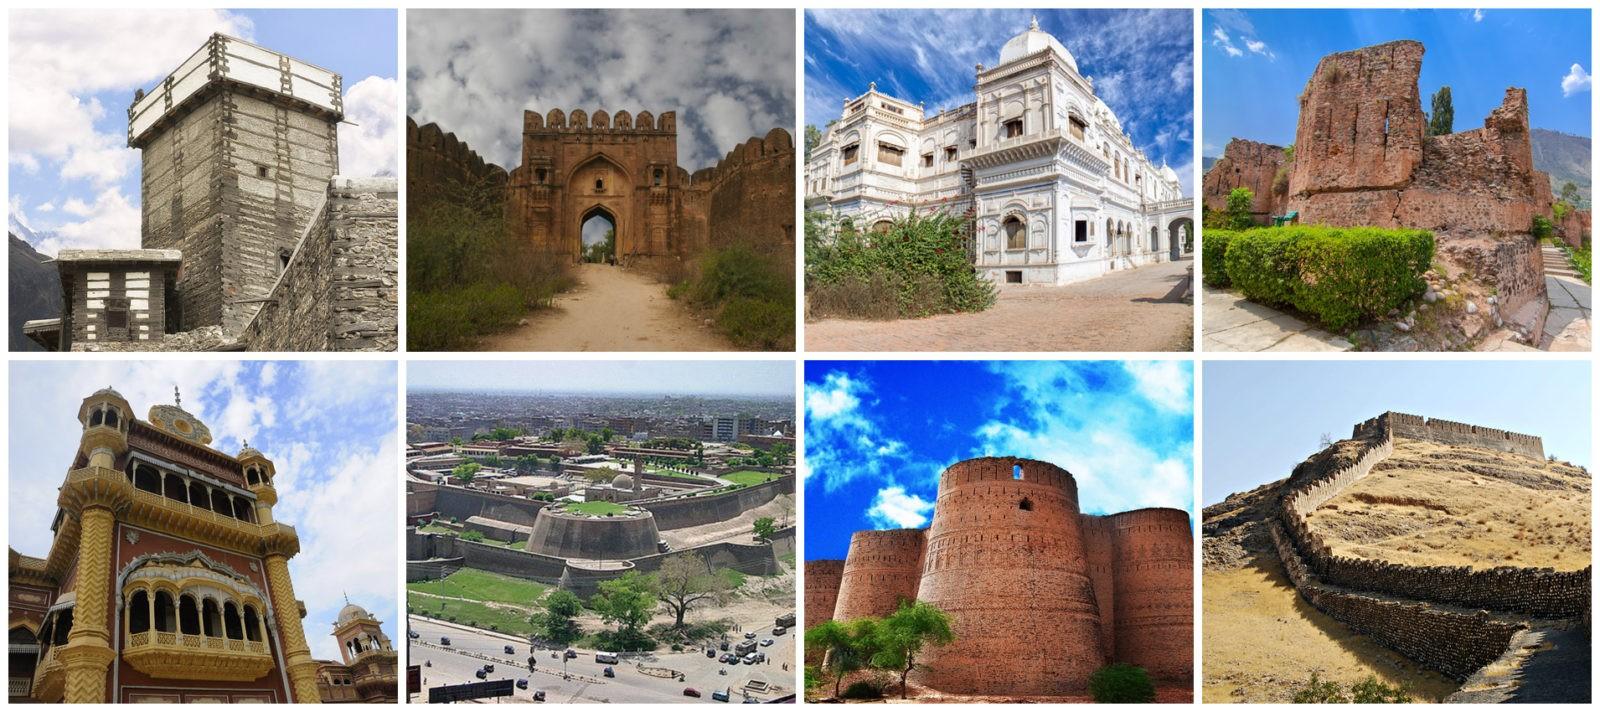 Visit-Pakistan-Today-And-Witness-The-Amazing-Forts-and-Castles-of-Pakistan